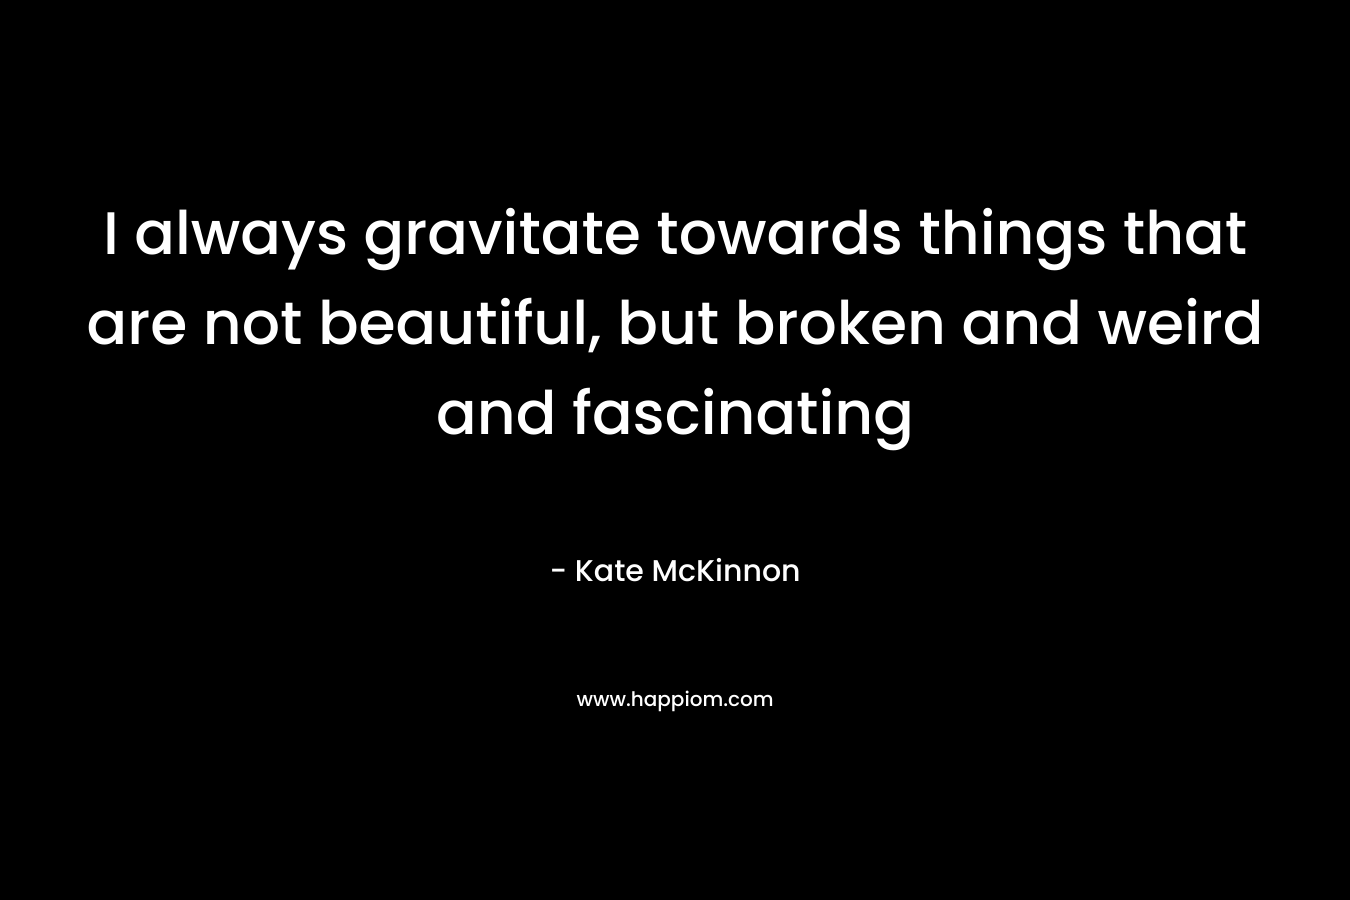 I always gravitate towards things that are not beautiful, but broken and weird and fascinating – Kate McKinnon